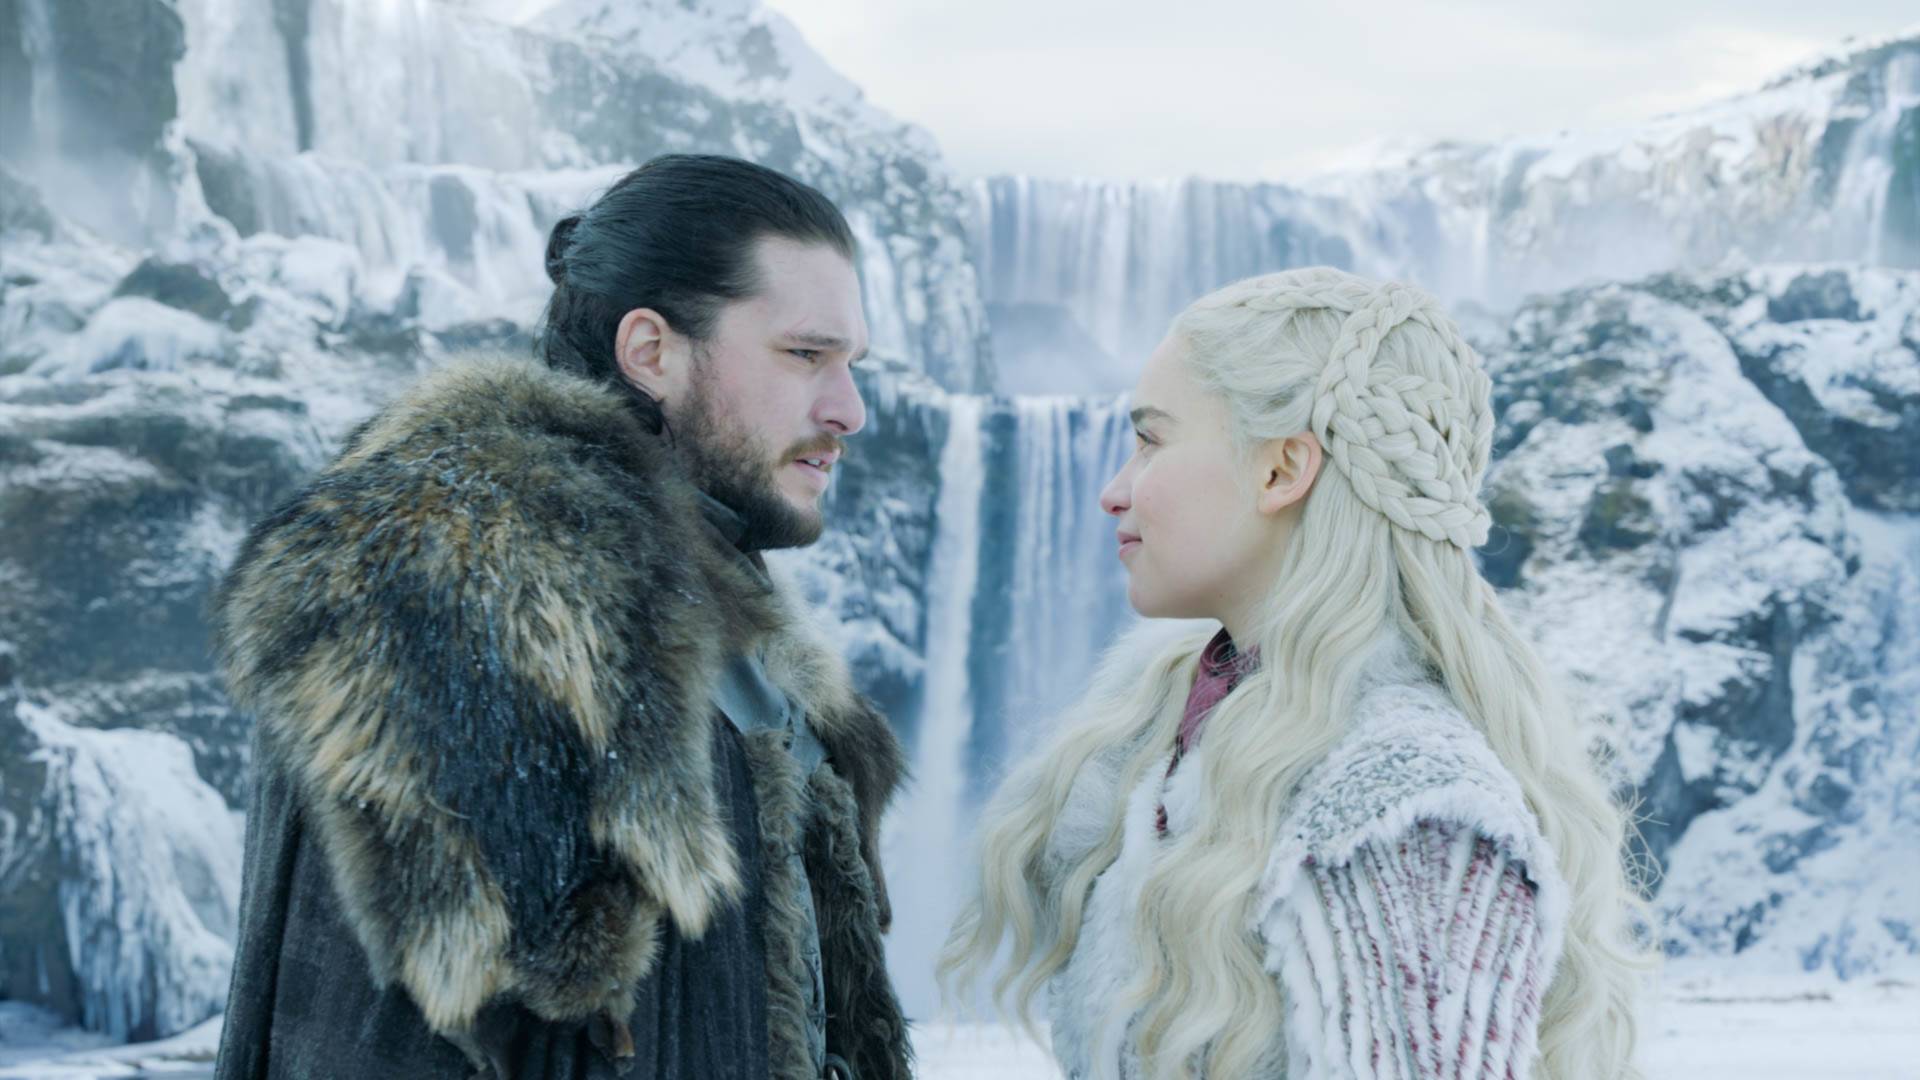 kit harington and emilia clarke in iceland in season 8 of game of thrones